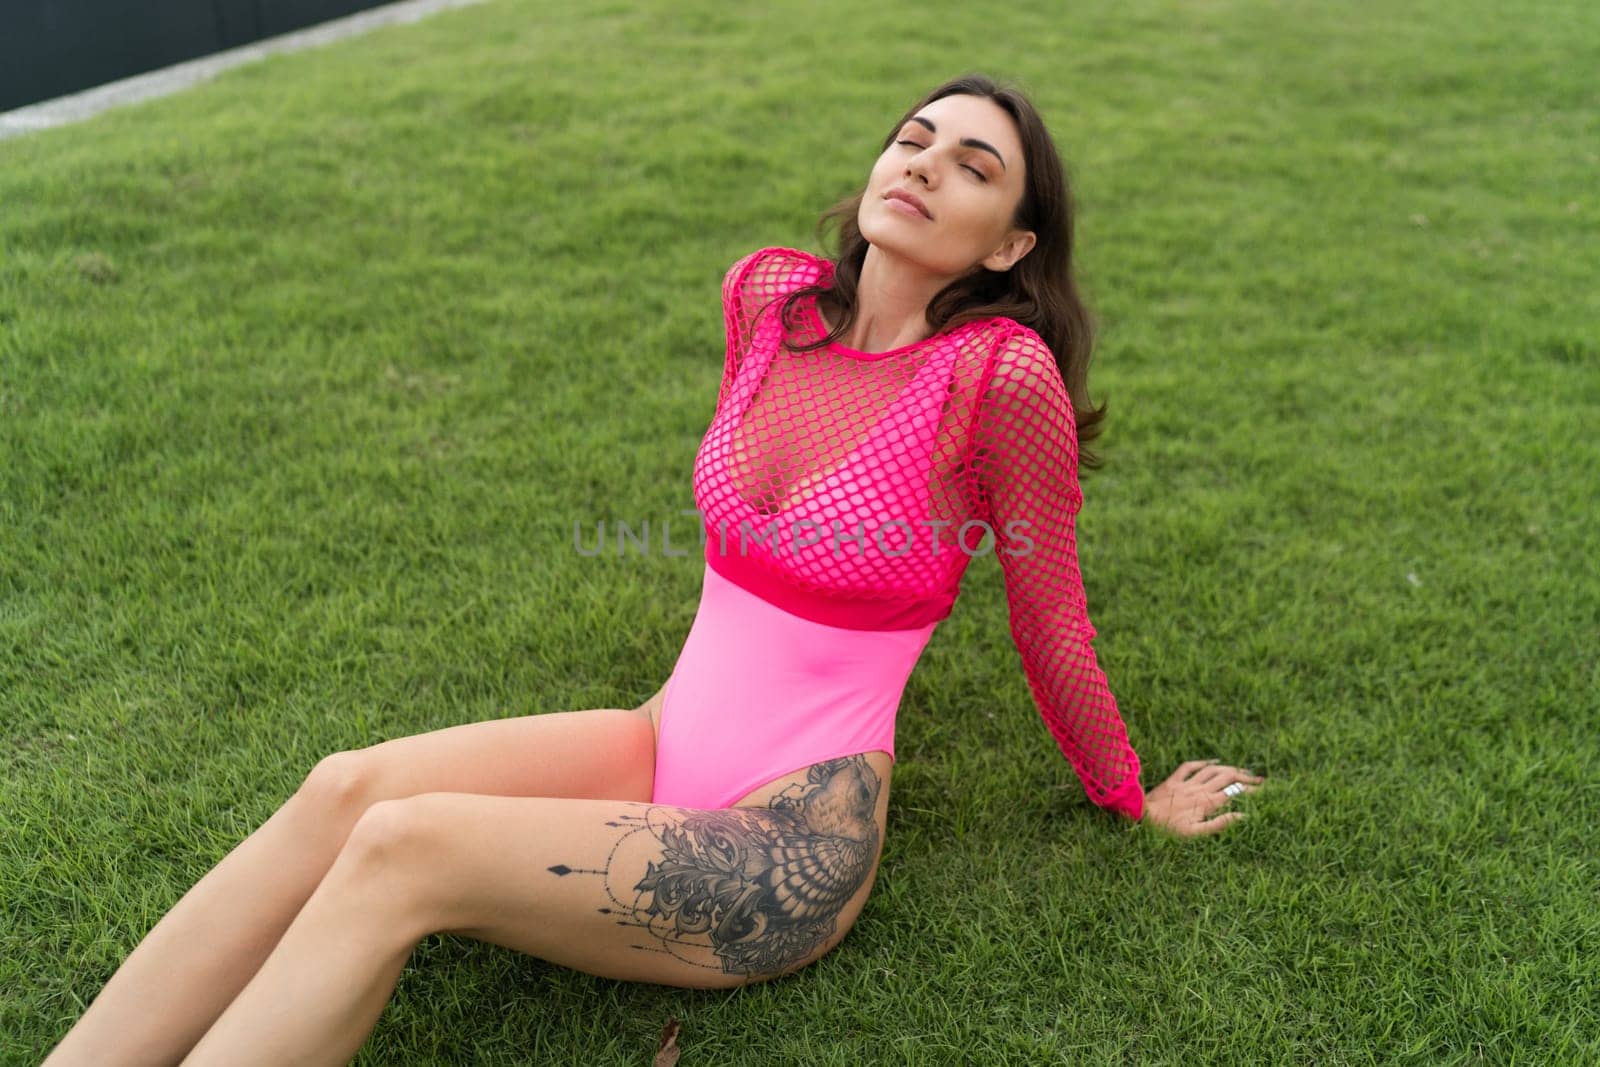 A slender young woman in a bright swimsuit on the grass by the pool, a large tattoo on her thigh. Slim athletic girl posing, tender romantic sexy